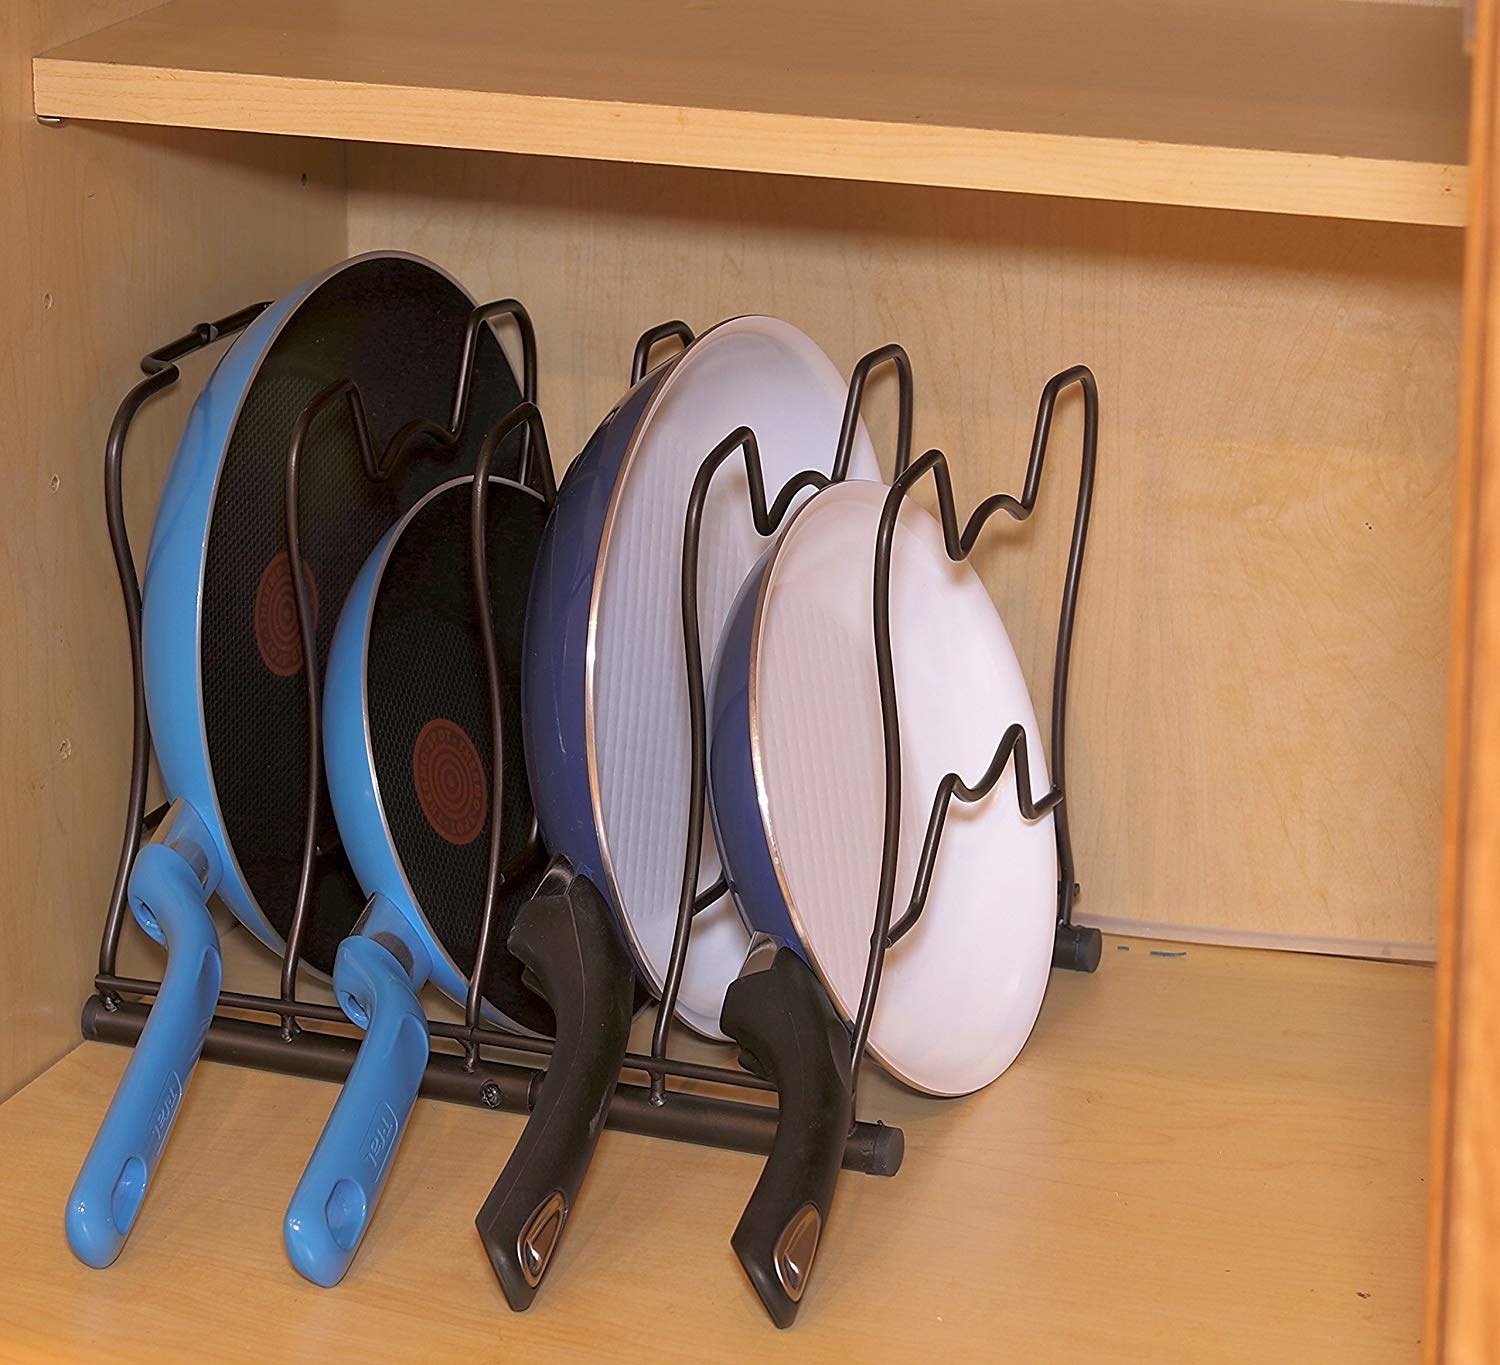 four pans standing in a rack